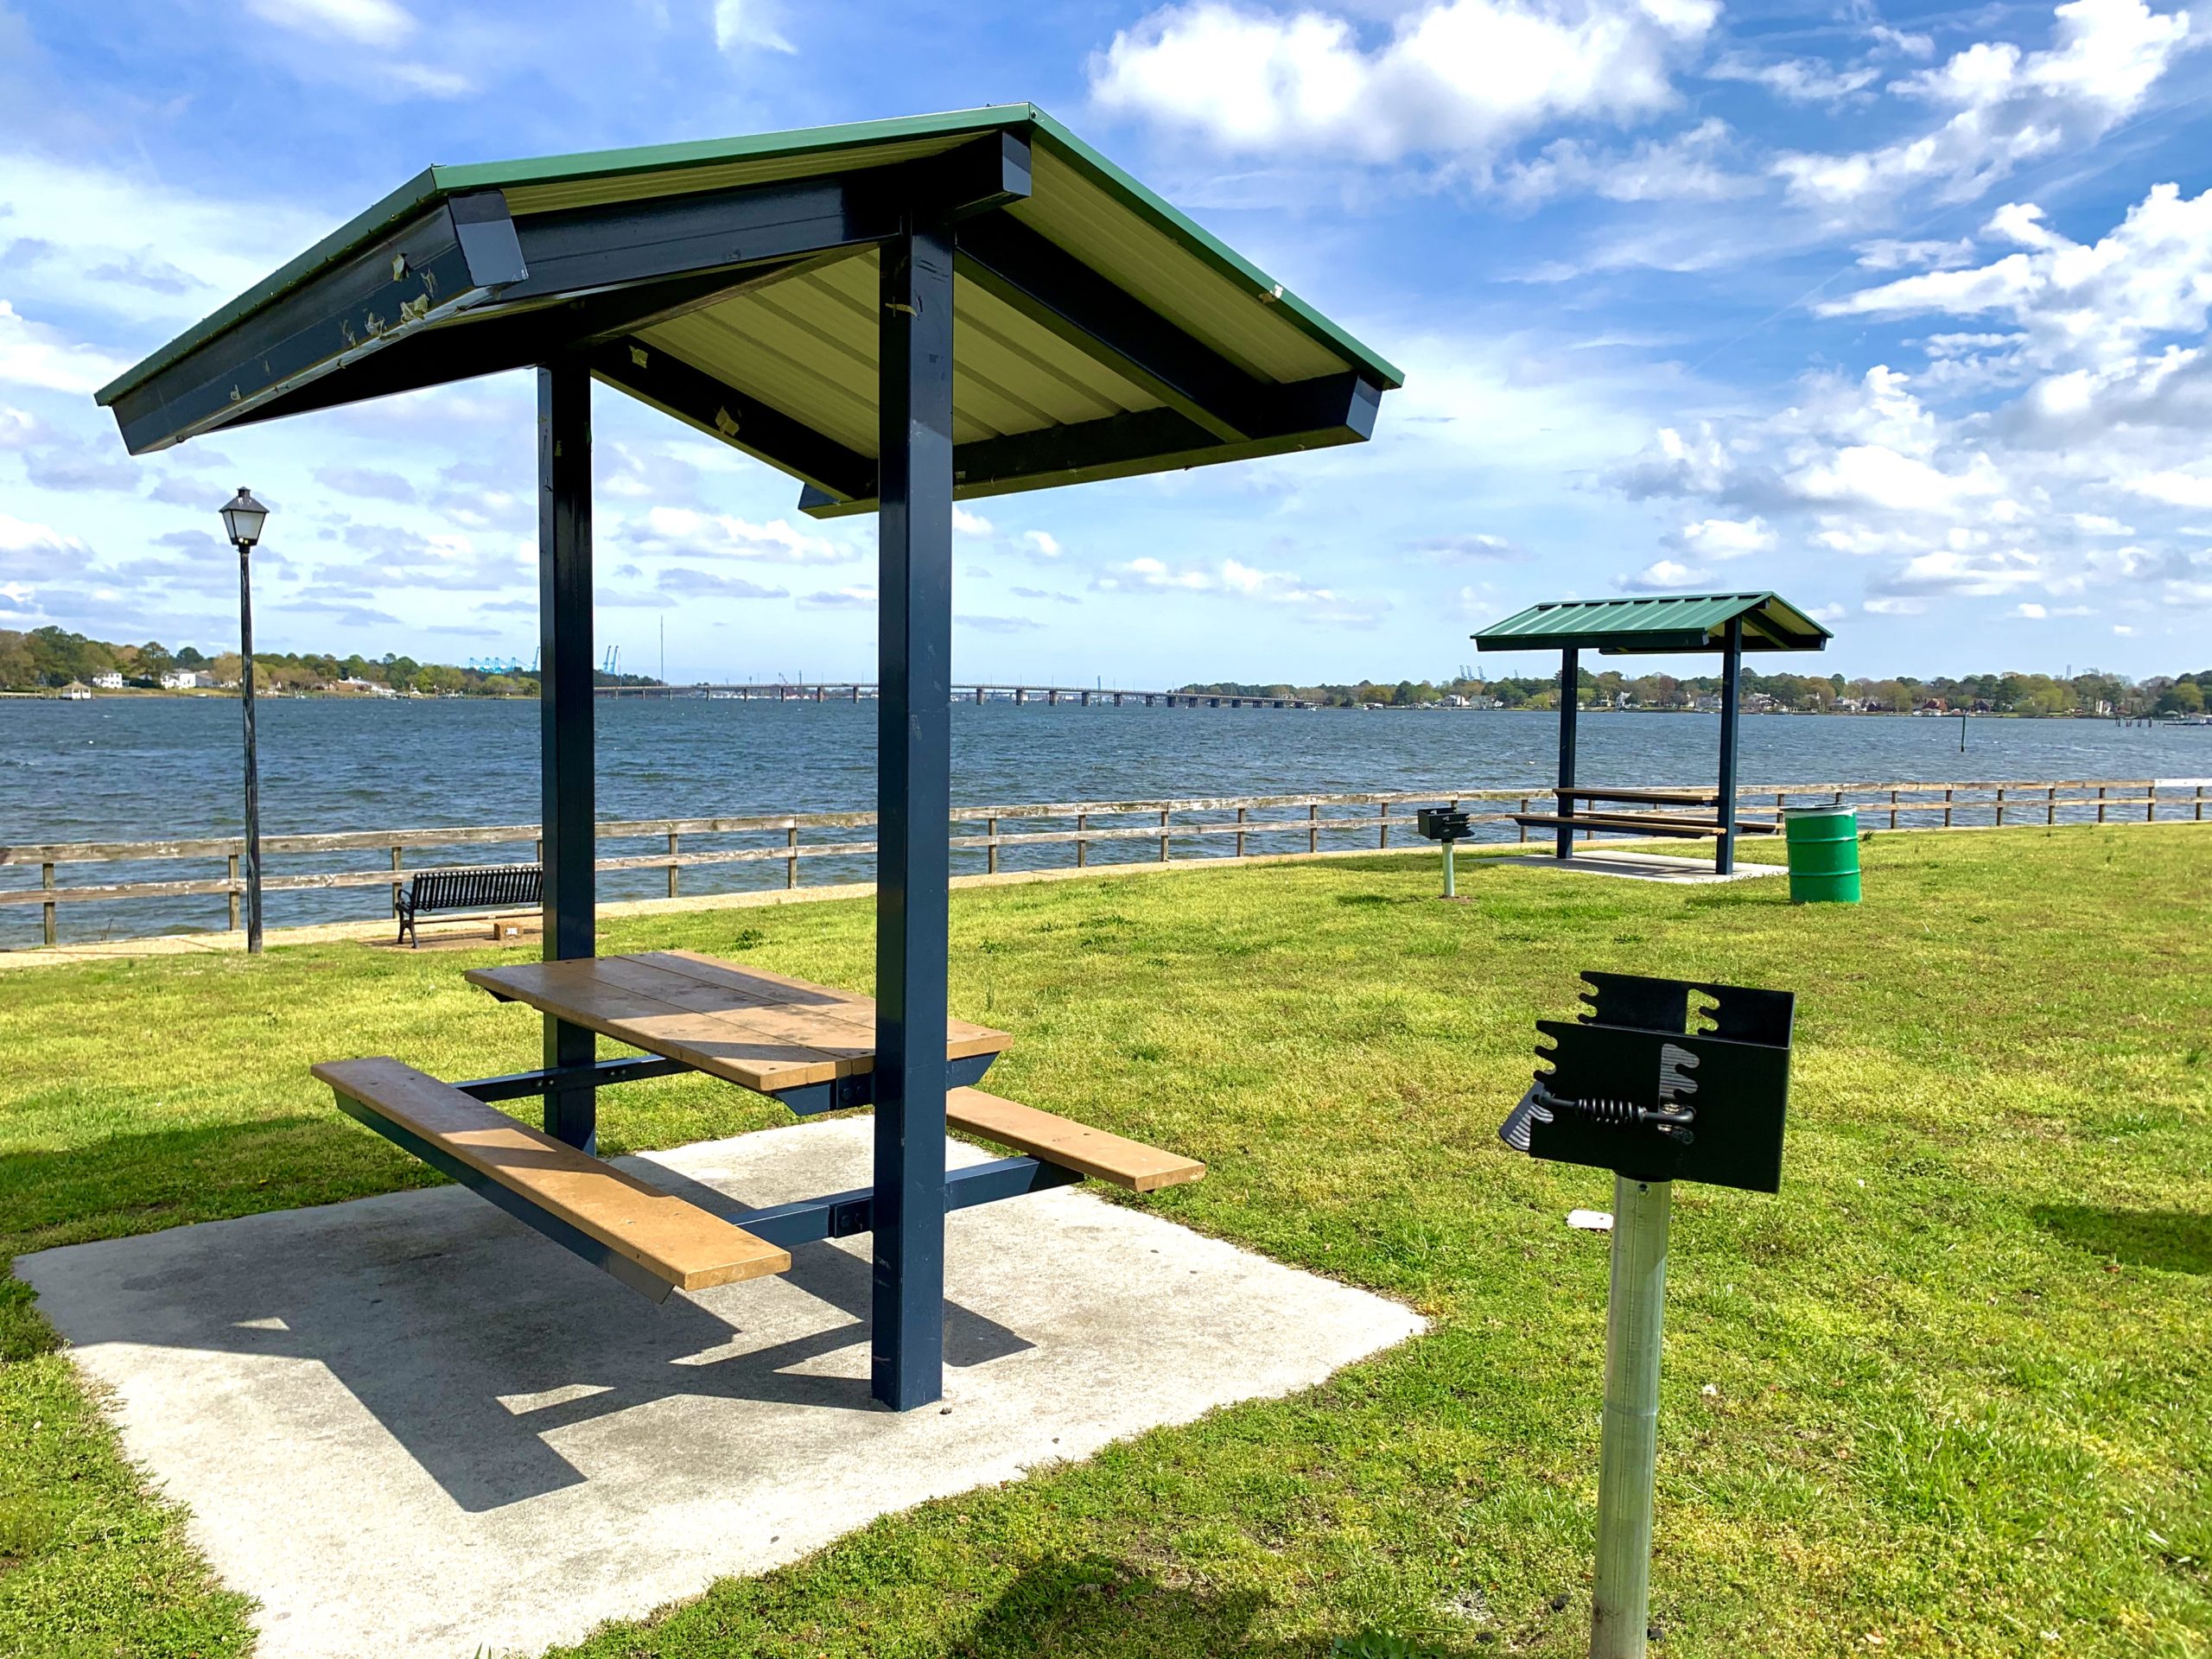 City Park picnic shelters offer spectacular river views from this nature park in Portsmouth Virginia